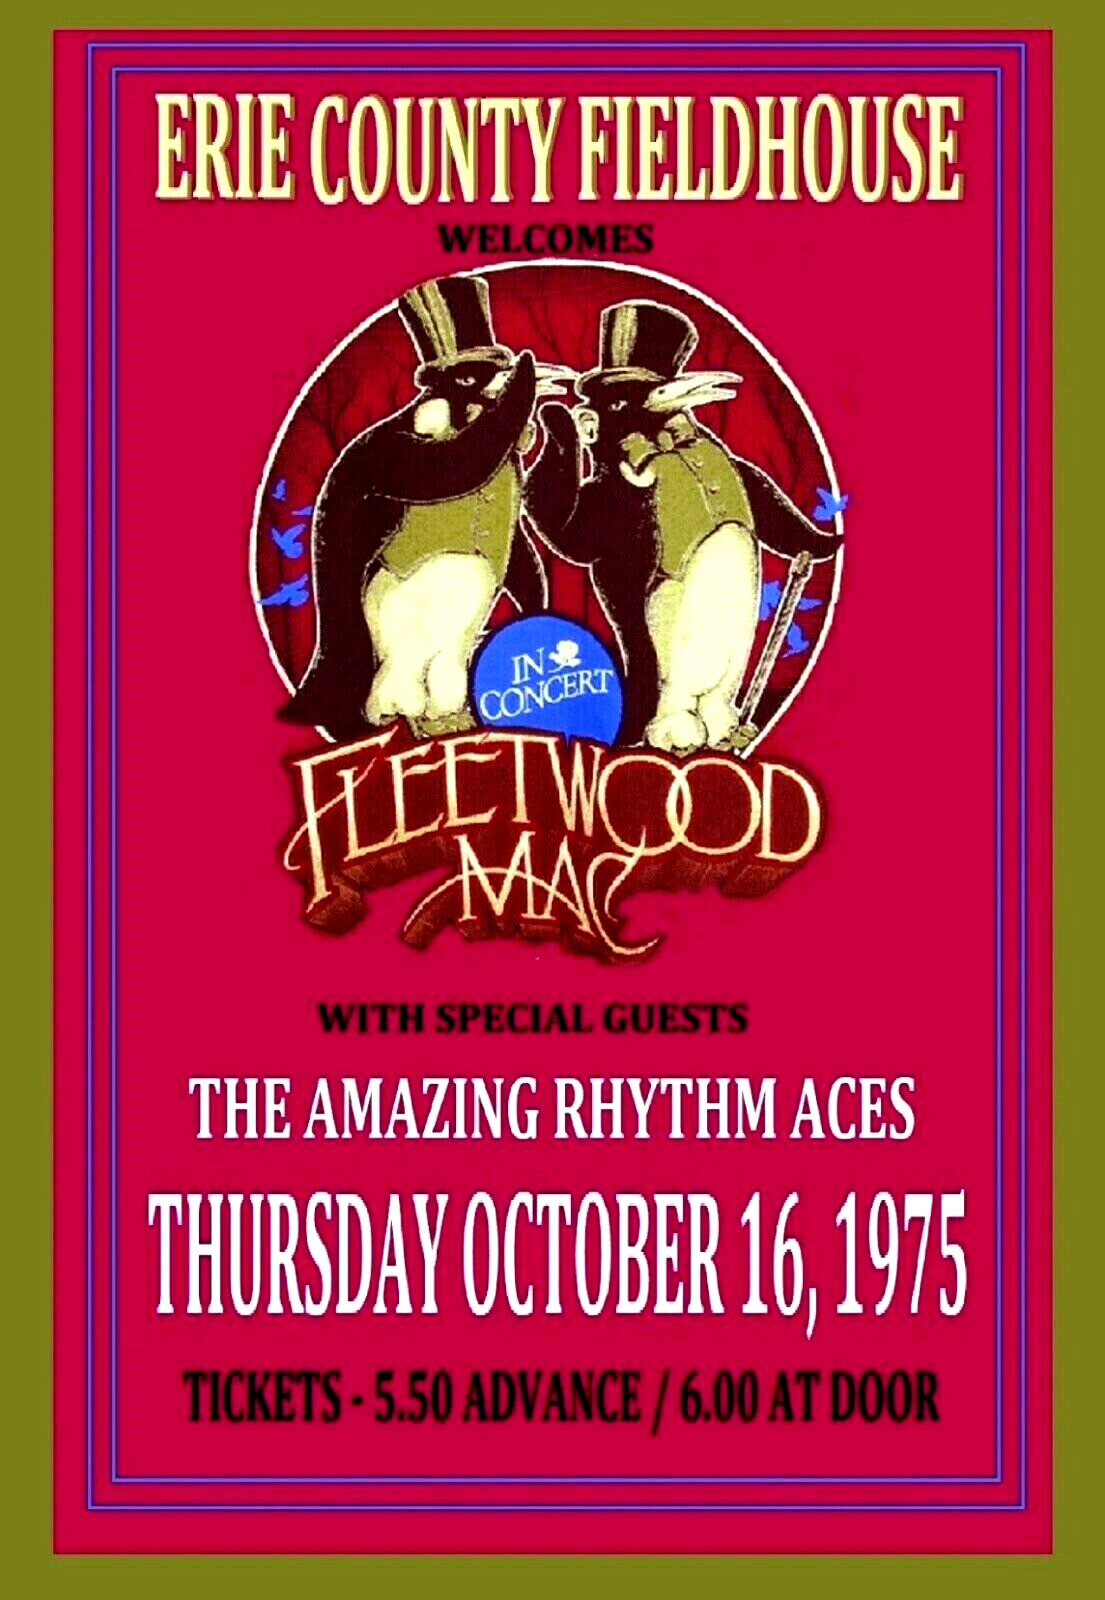 FLEETWOOD MAC - AMAZING RHYTHM ACES -ERIE COUNTY FIELDHOUSE- POSTER / 11 x 17 IN